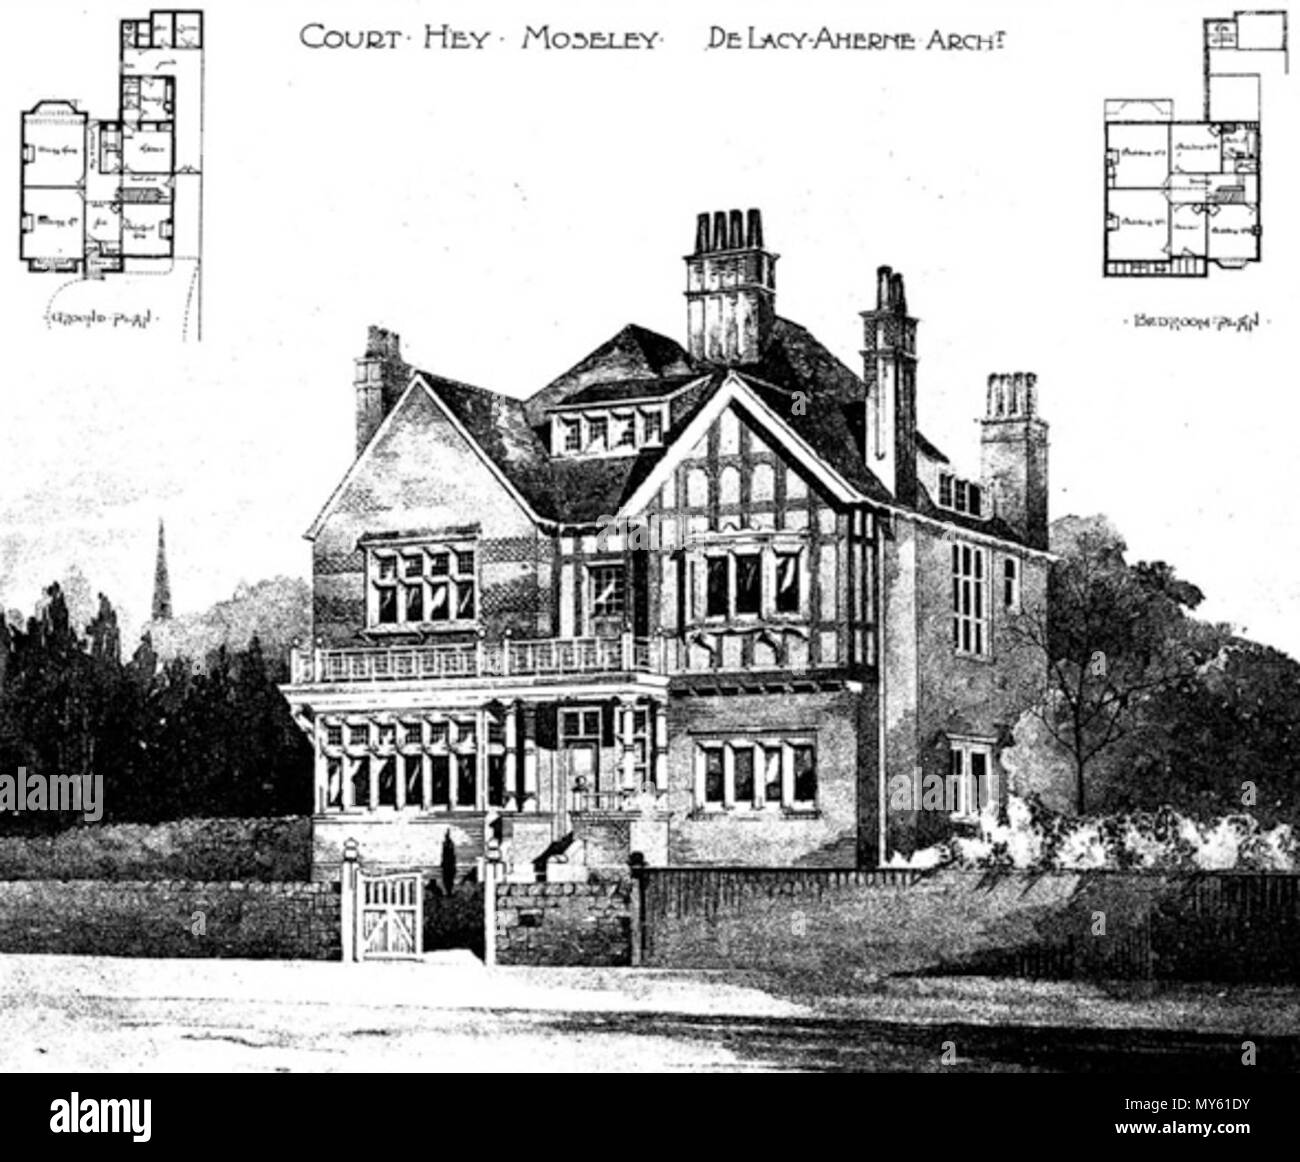 . English: Drawing of Court Hey in Moseley, Birmingham by William de Lacy Aherne, published in The Building News, April 8th 1880 . 20 September 2010, 14:51:26. William de Lacy Aherne 125 Court Hey, Moseley - William De Lacy Aherne Stock Photo